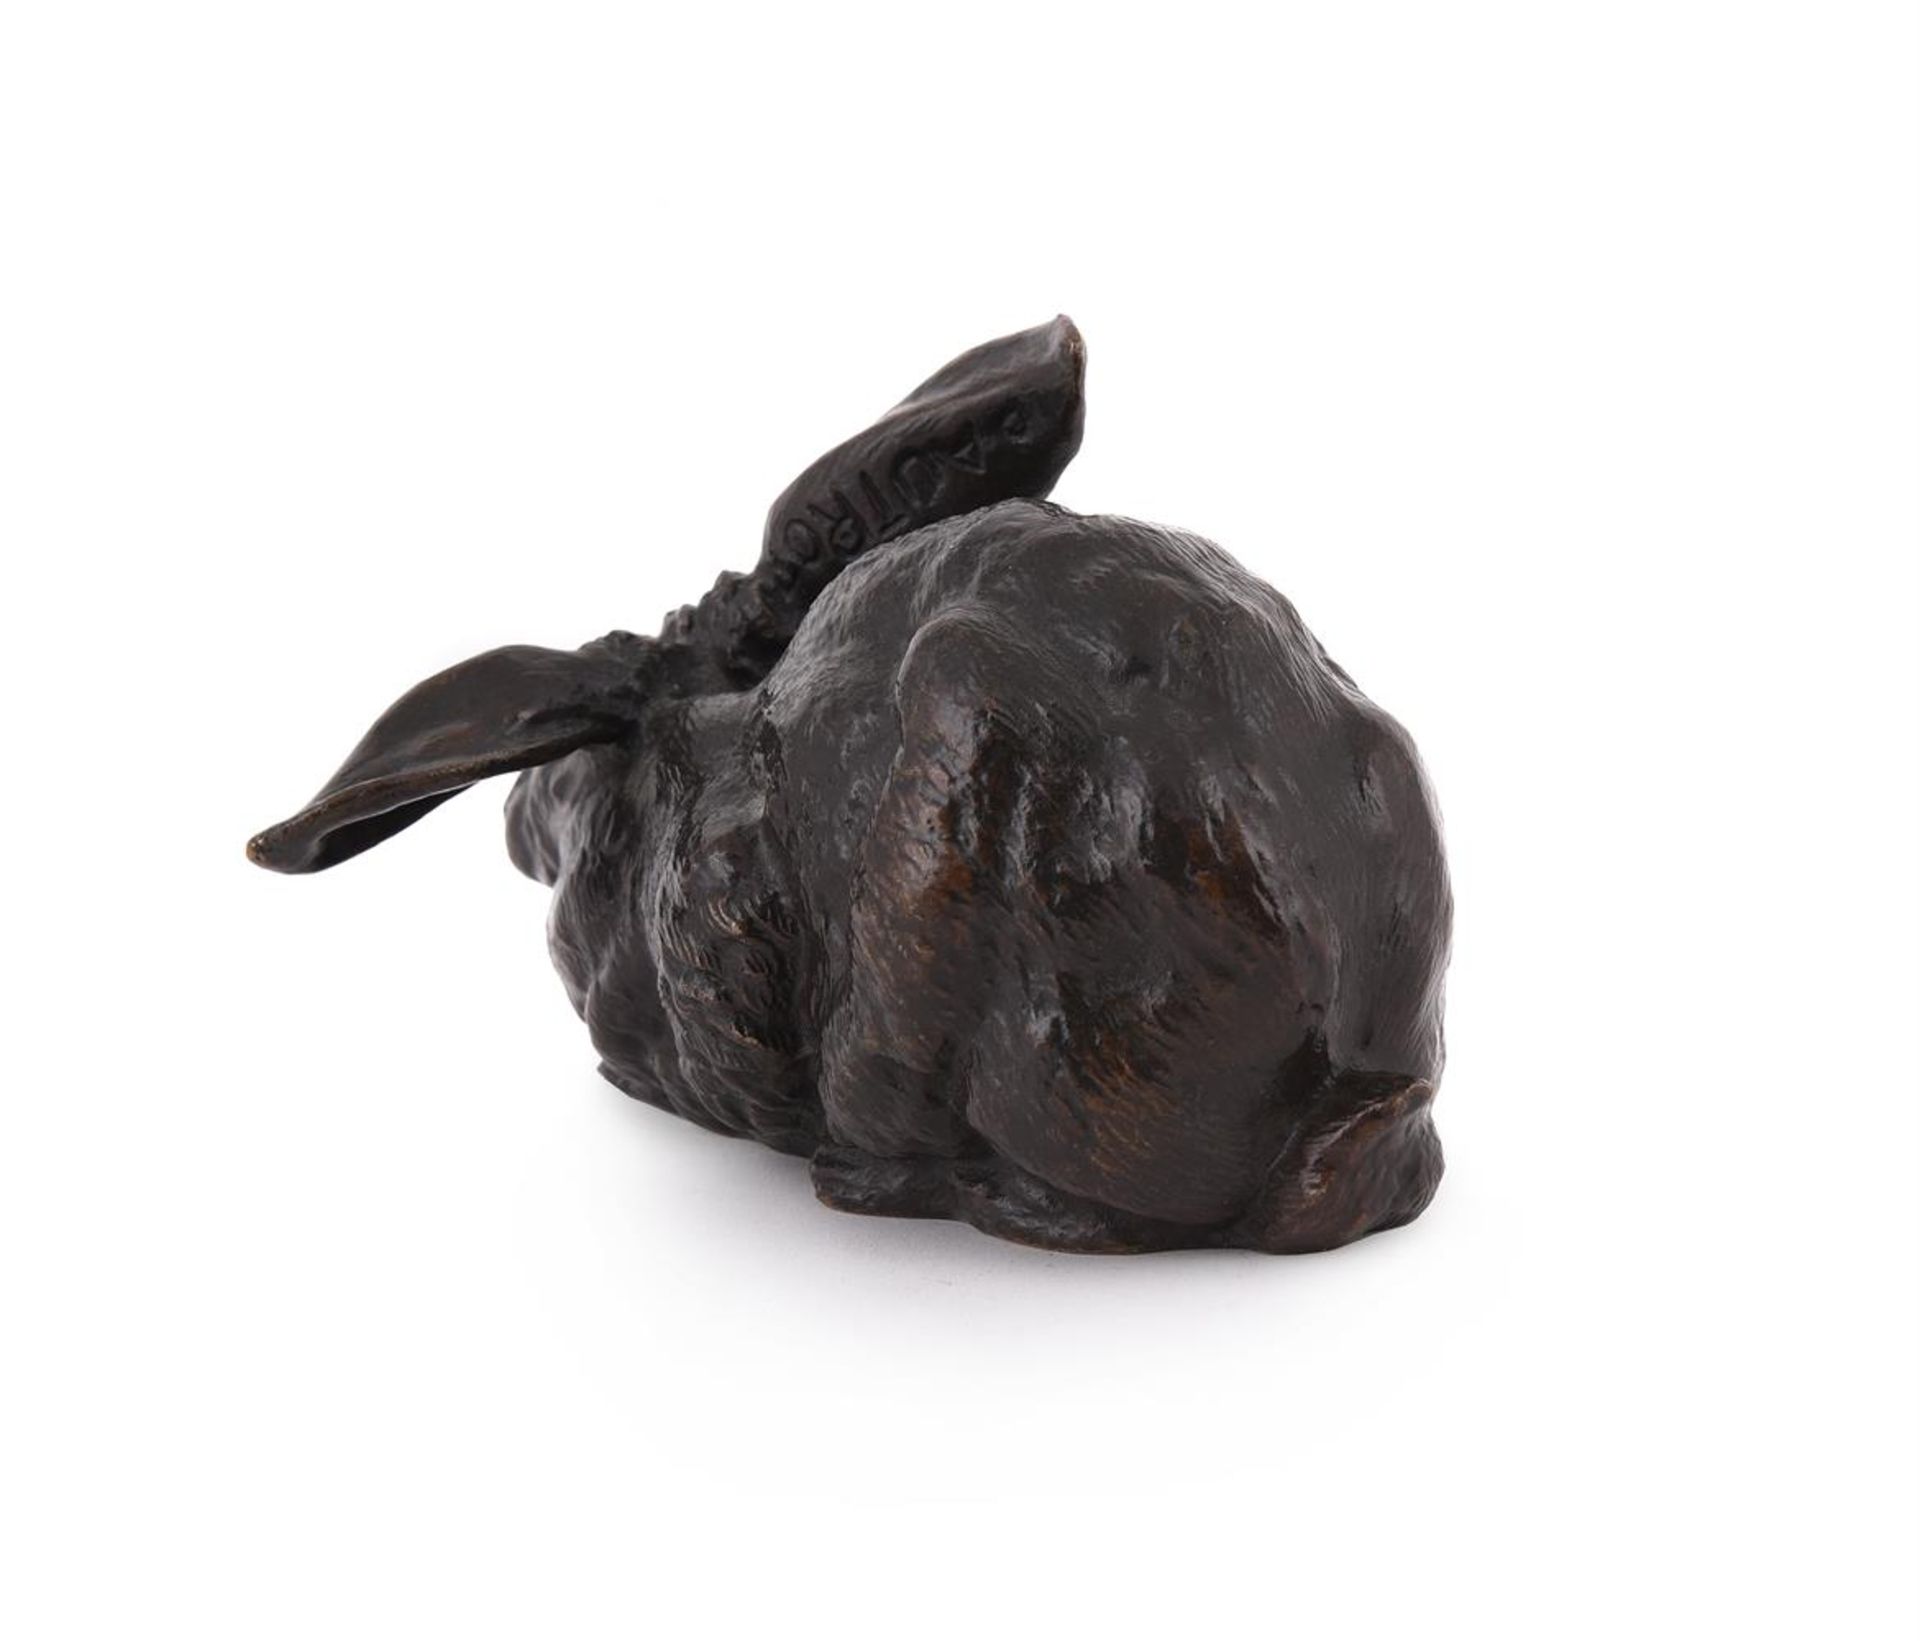 FERDINAND PAUTROT (FRENCH, 1832-1874), A BRONZE MODEL OF A RABBIT - Image 2 of 5